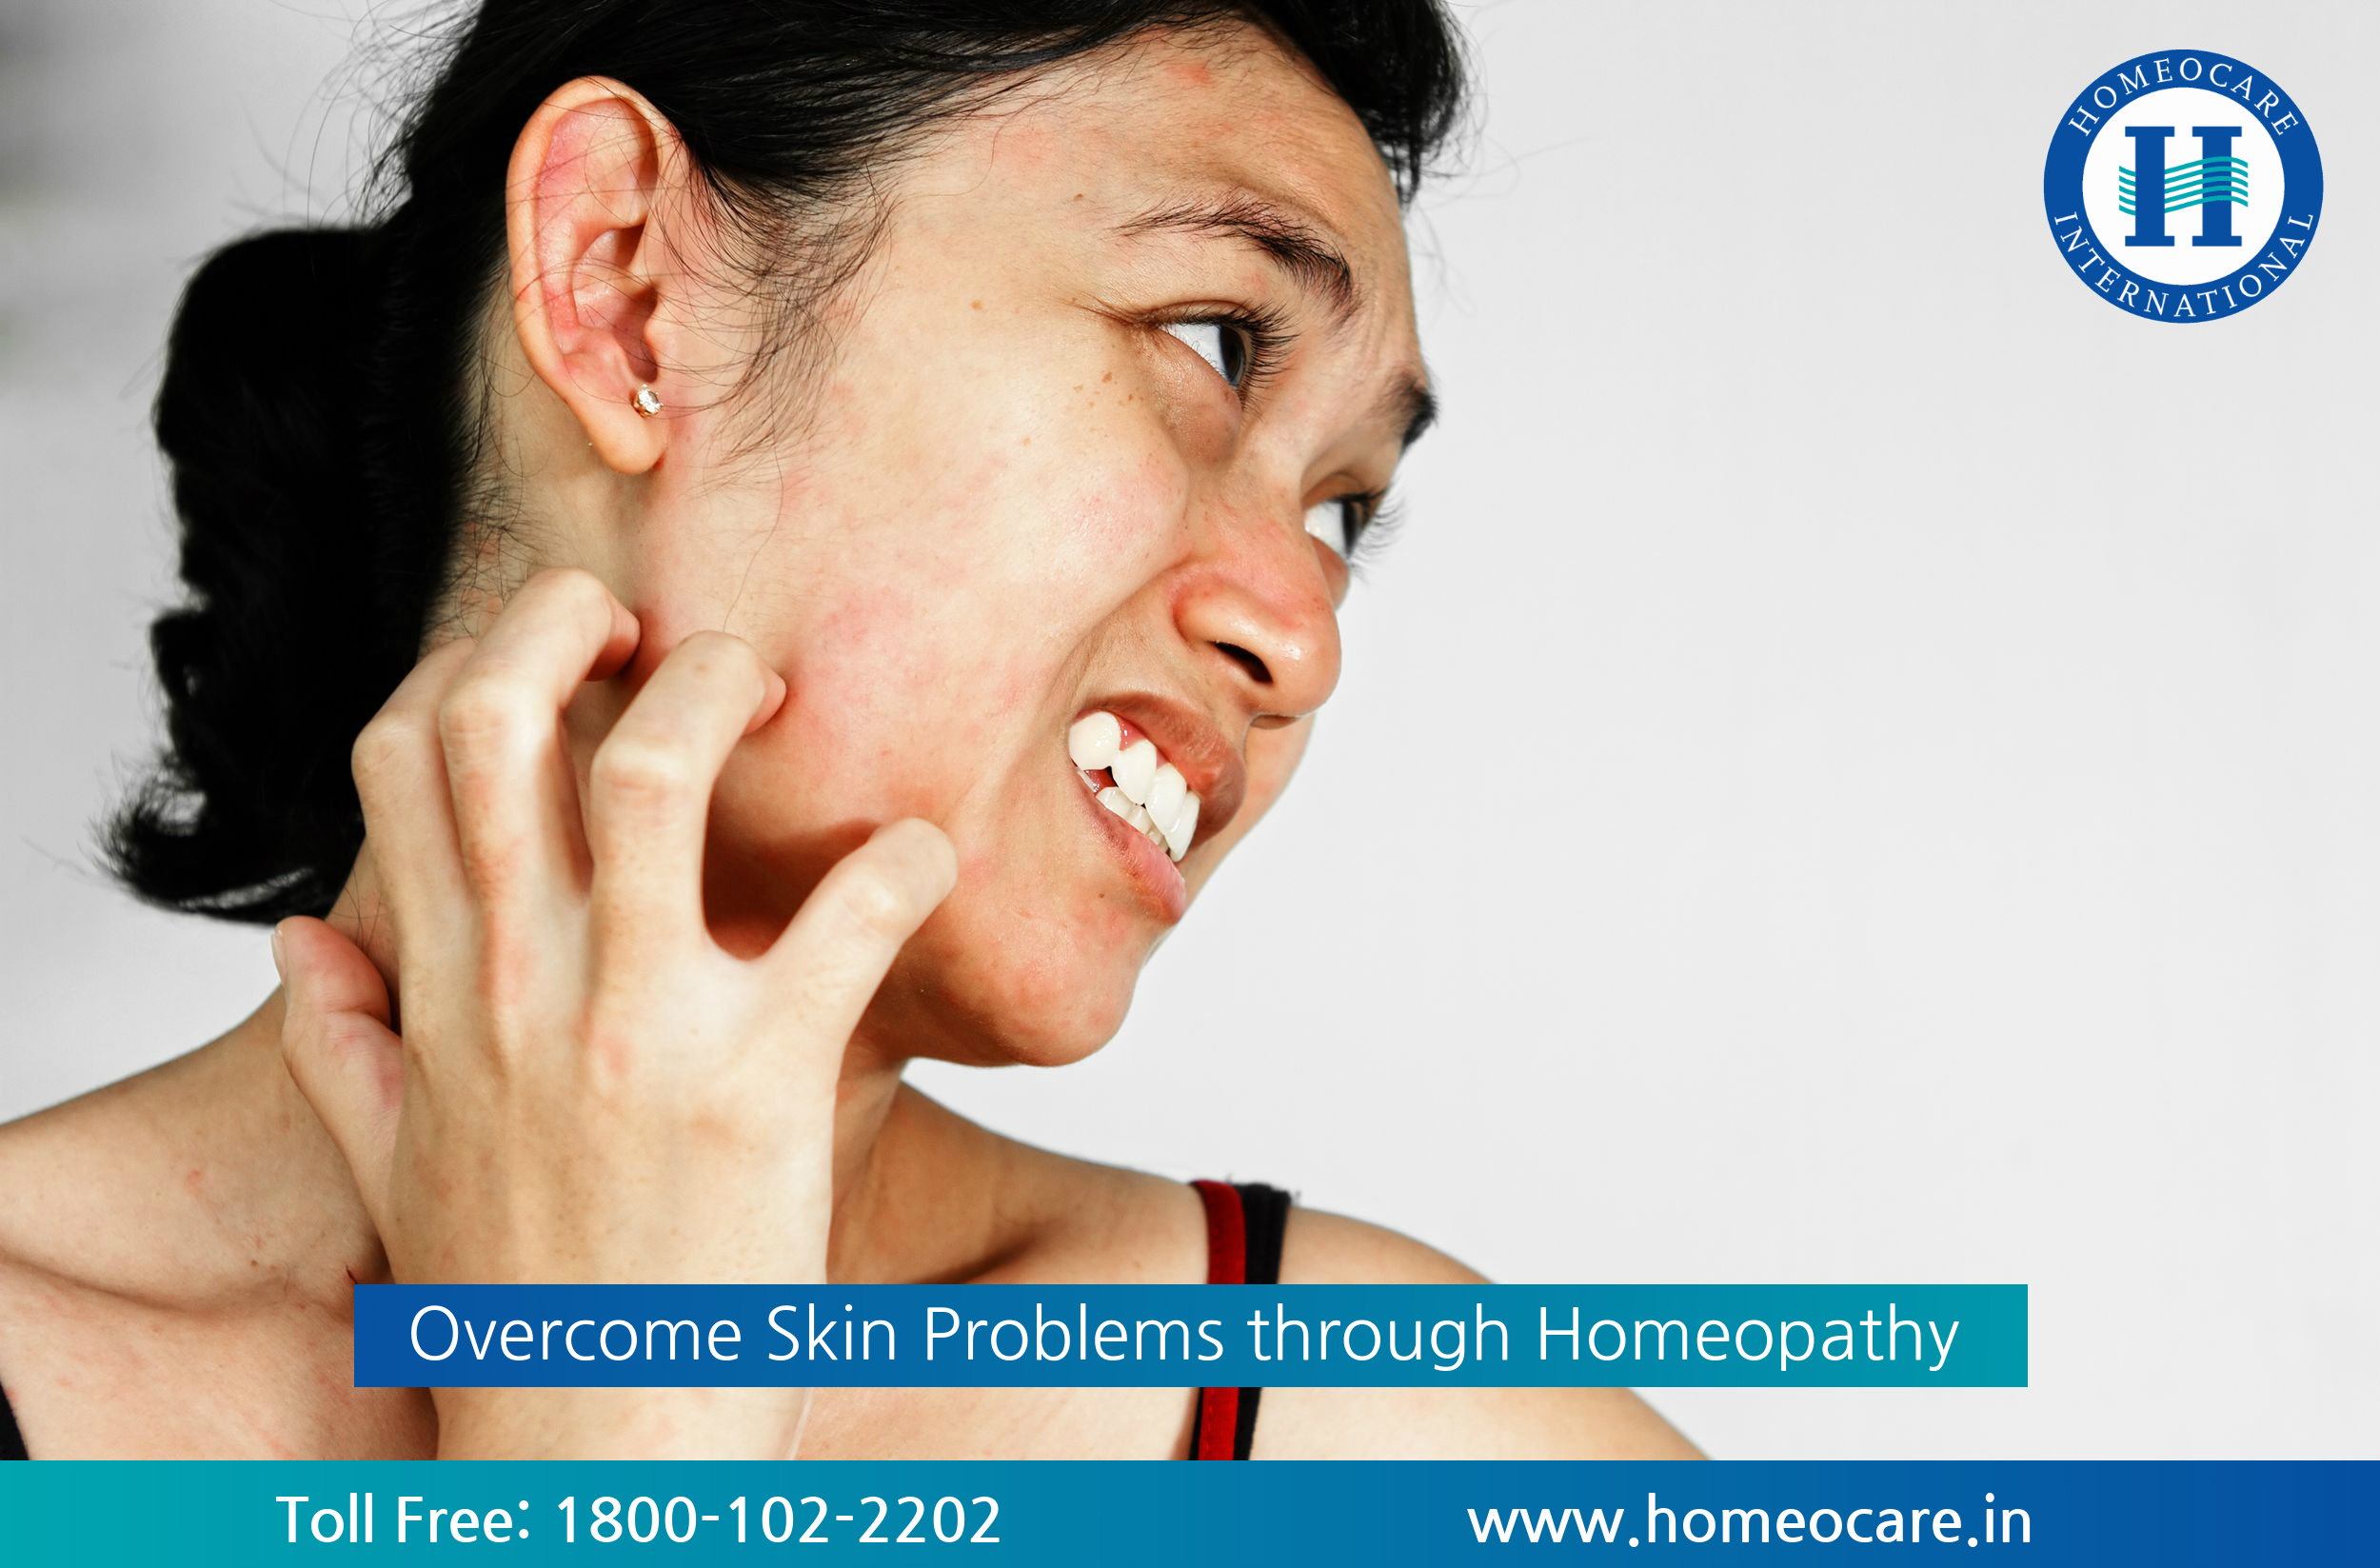 Overcome Skin Problems through Homeopathy